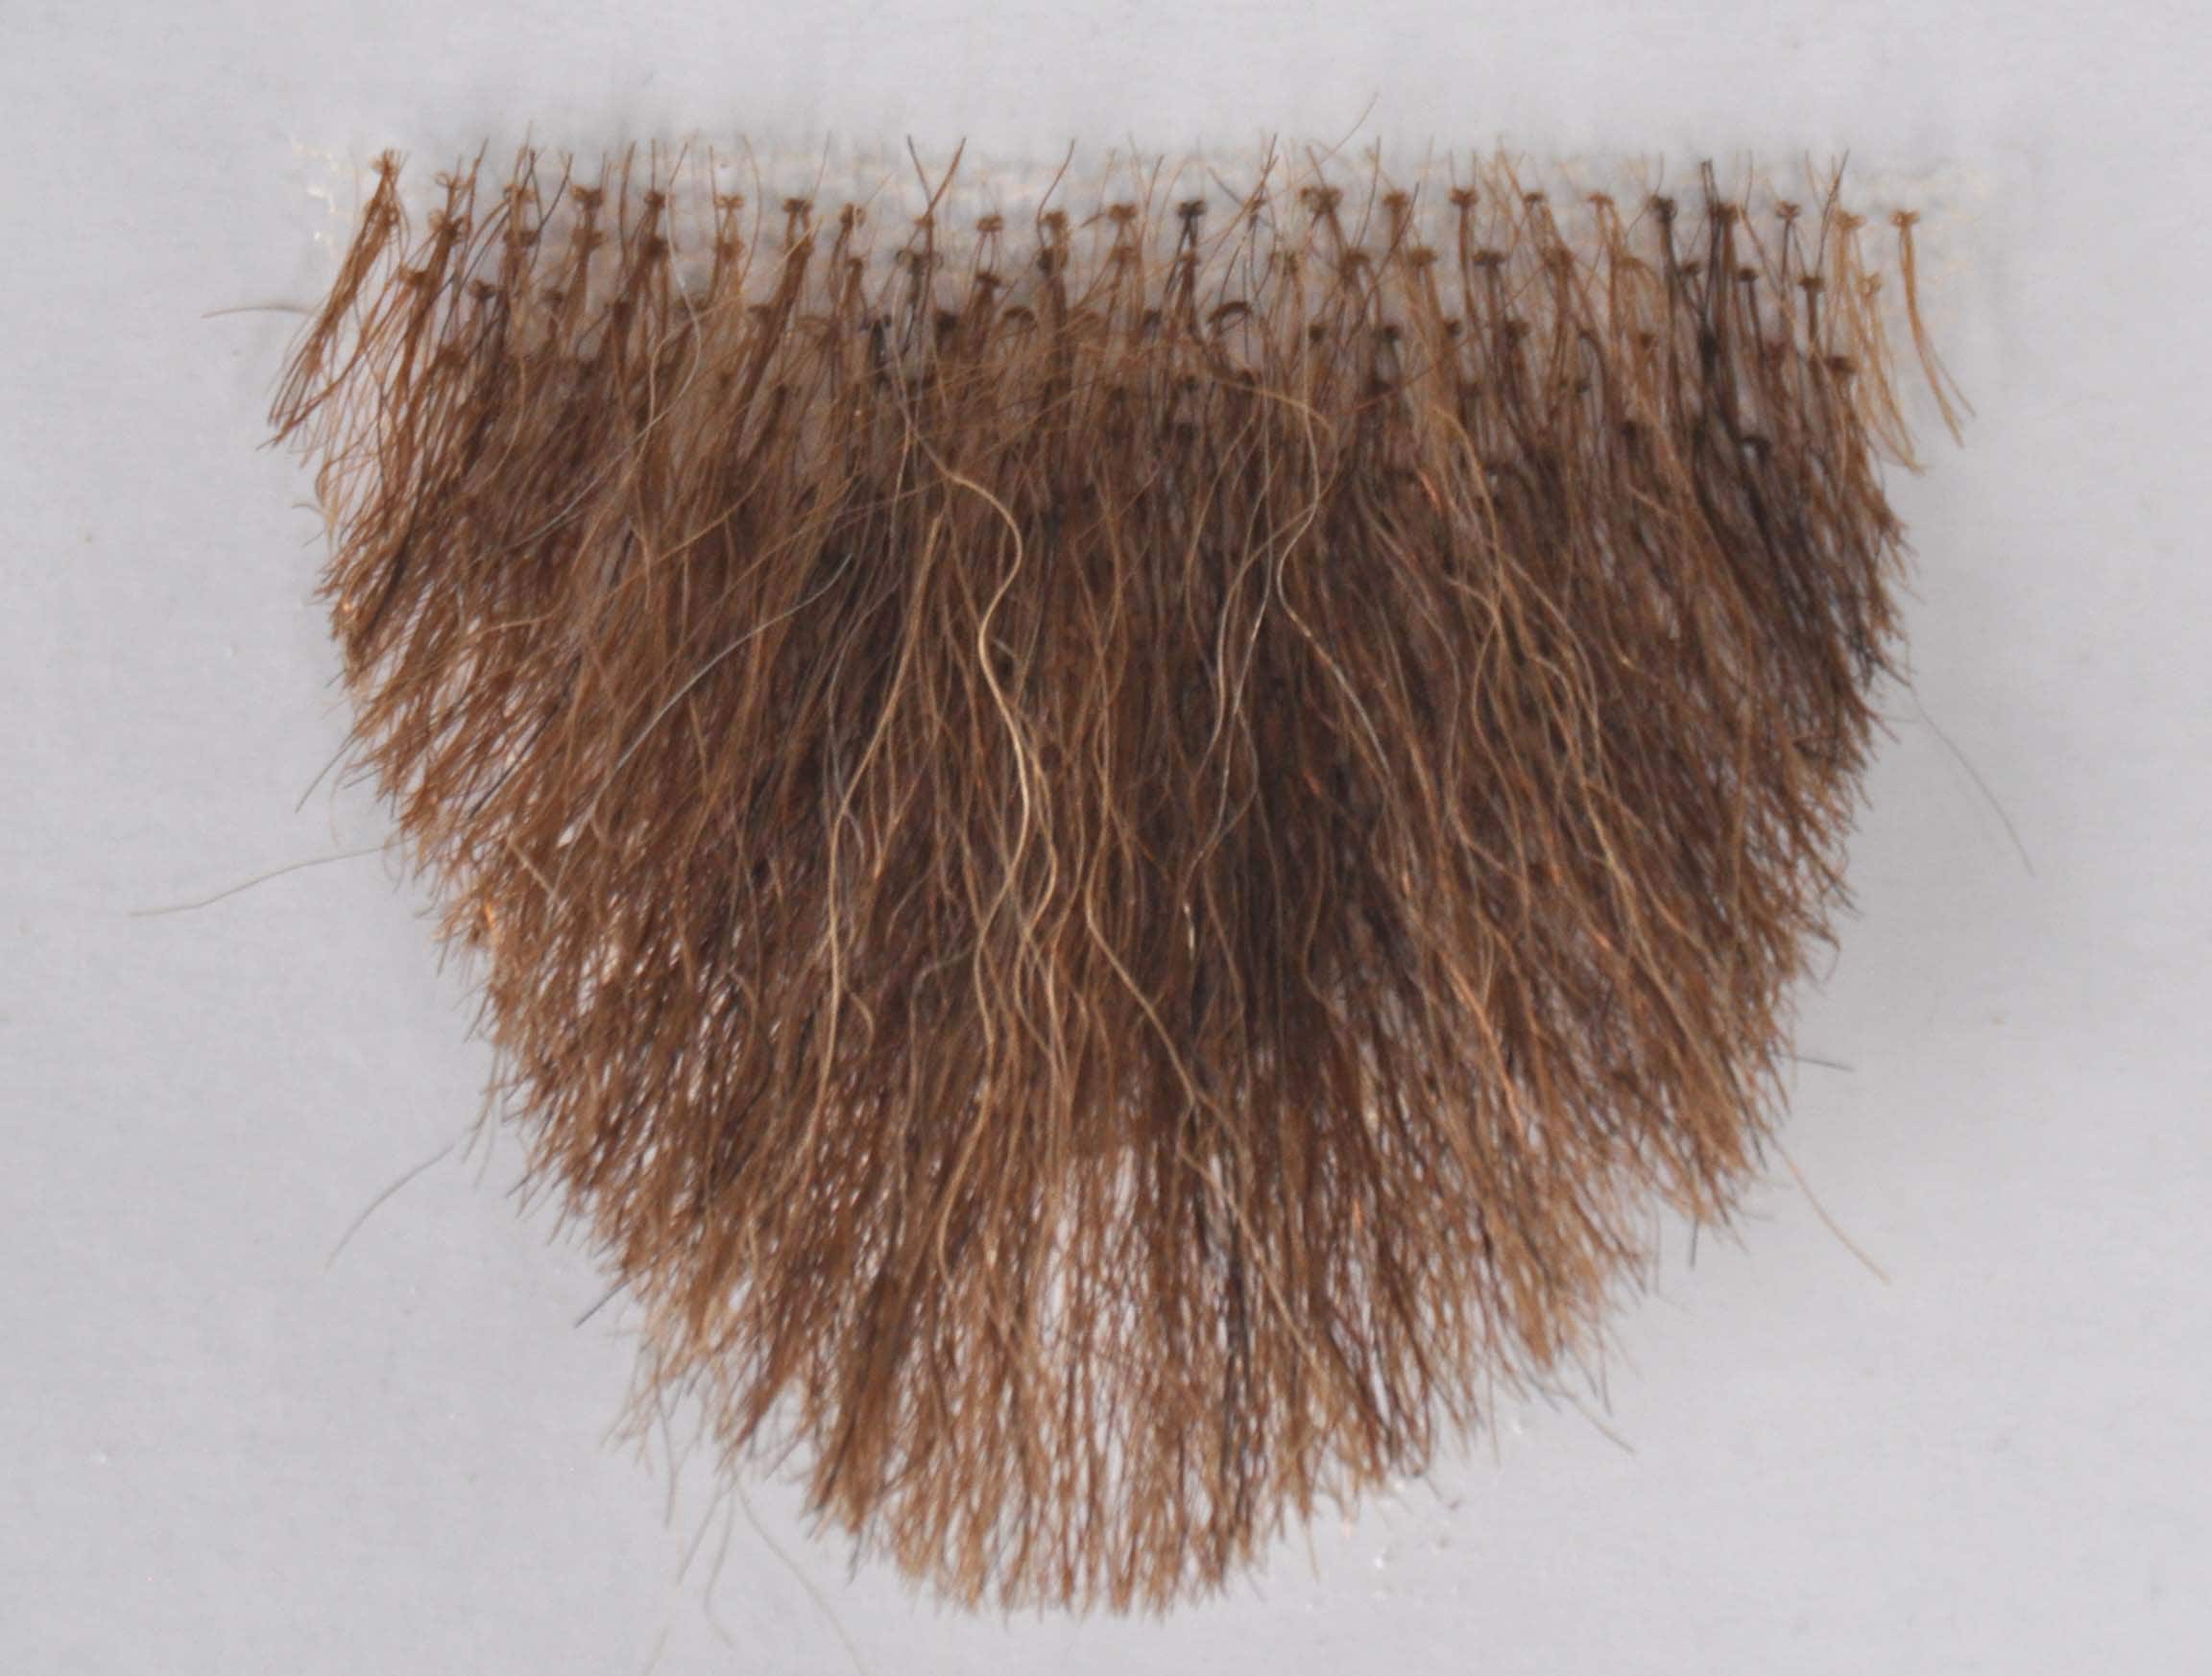  MakupArtist Pubic Toupee Merkin Human Hair Very Small Unisex in  4 Colors High Density 1.08 grams Blond : Everything Else